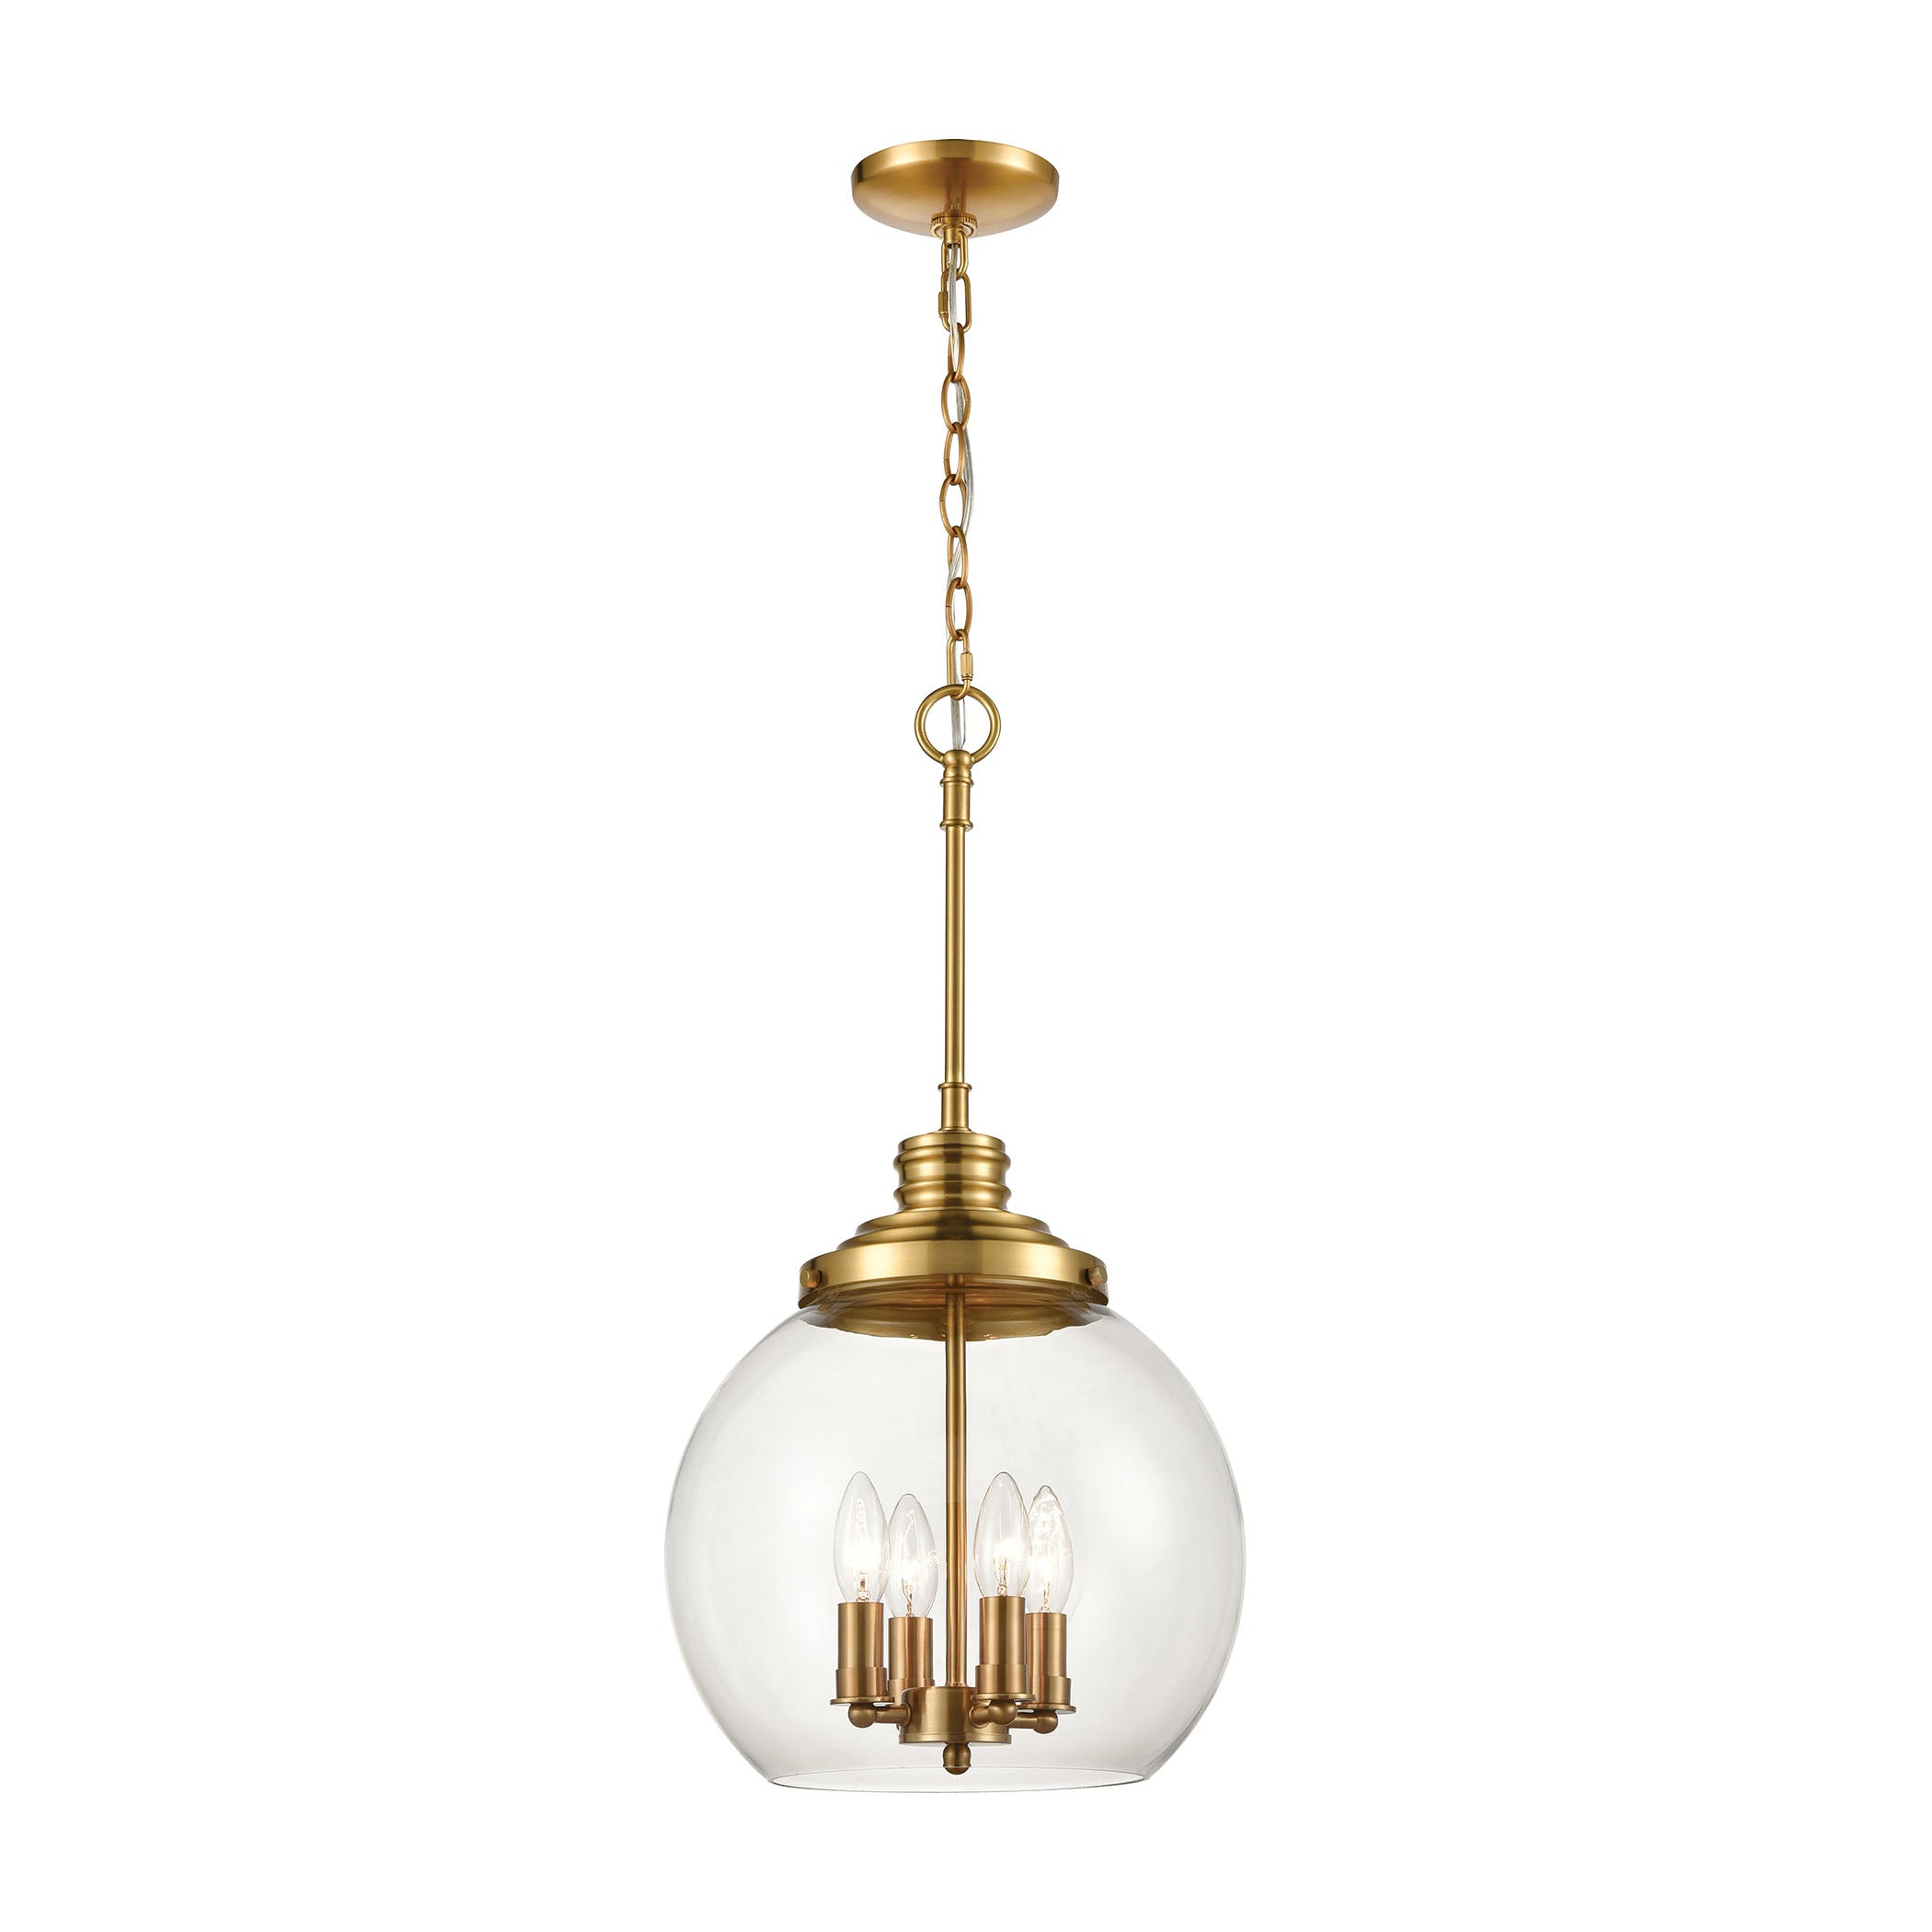 ELK Lighting 46834/4 Chandra 4-Light Pendant in Burnished Brass with Clear Glass